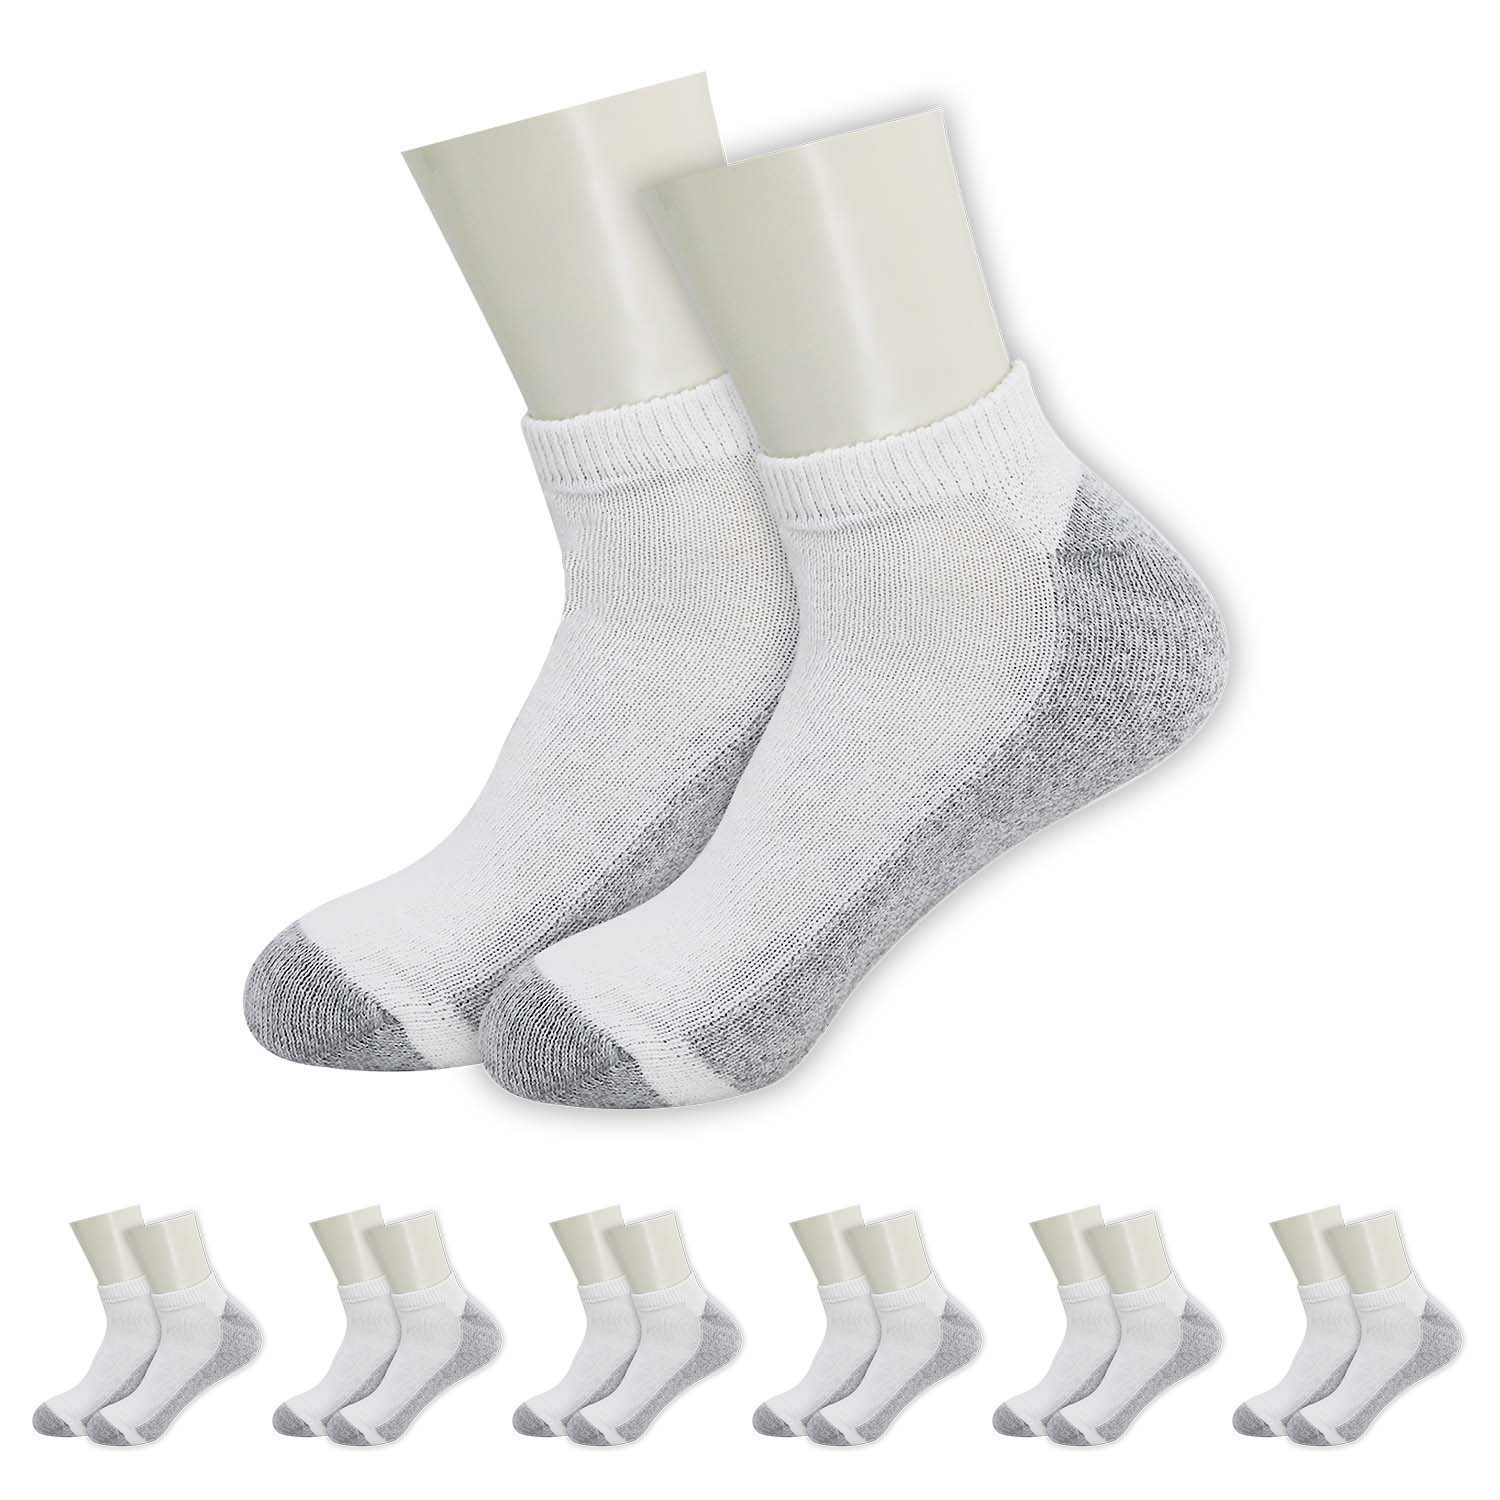 180 Pairs - Low Cut Bulk Socks Athletic Size 10-13 in White with Grey - Wholesale  Case of 180 Mens Socks - F1475-180